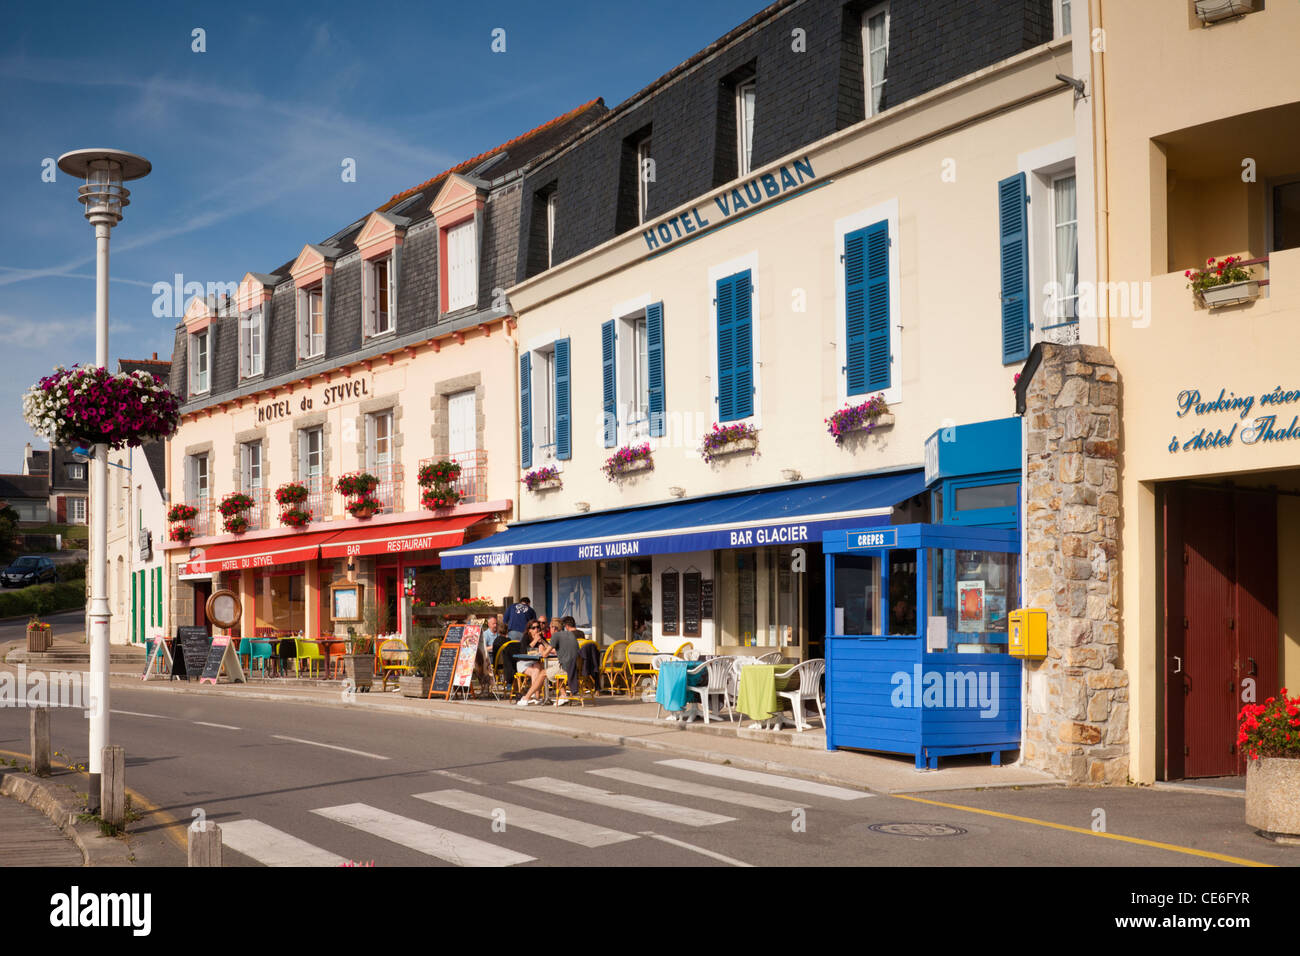 Hotels and pavement cafes at Cameret-sur-Mer, Brittany, France. Stock Photo